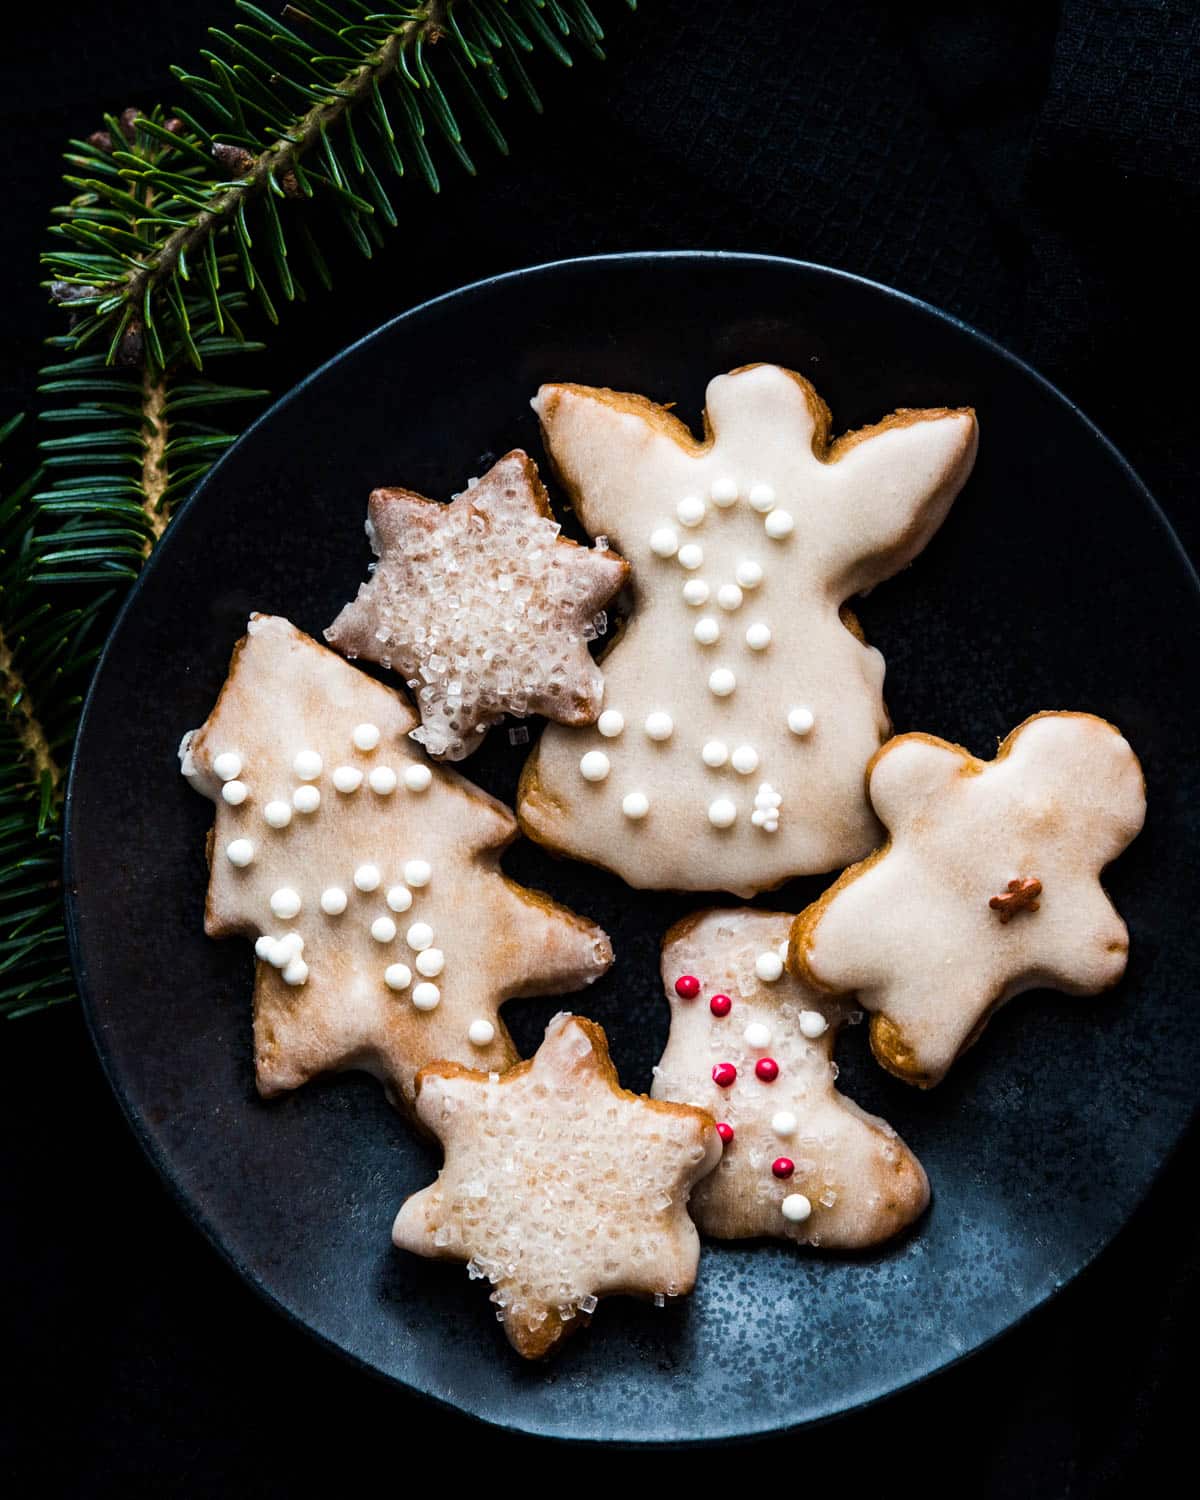 Spiced cutout cookies on a black plate.